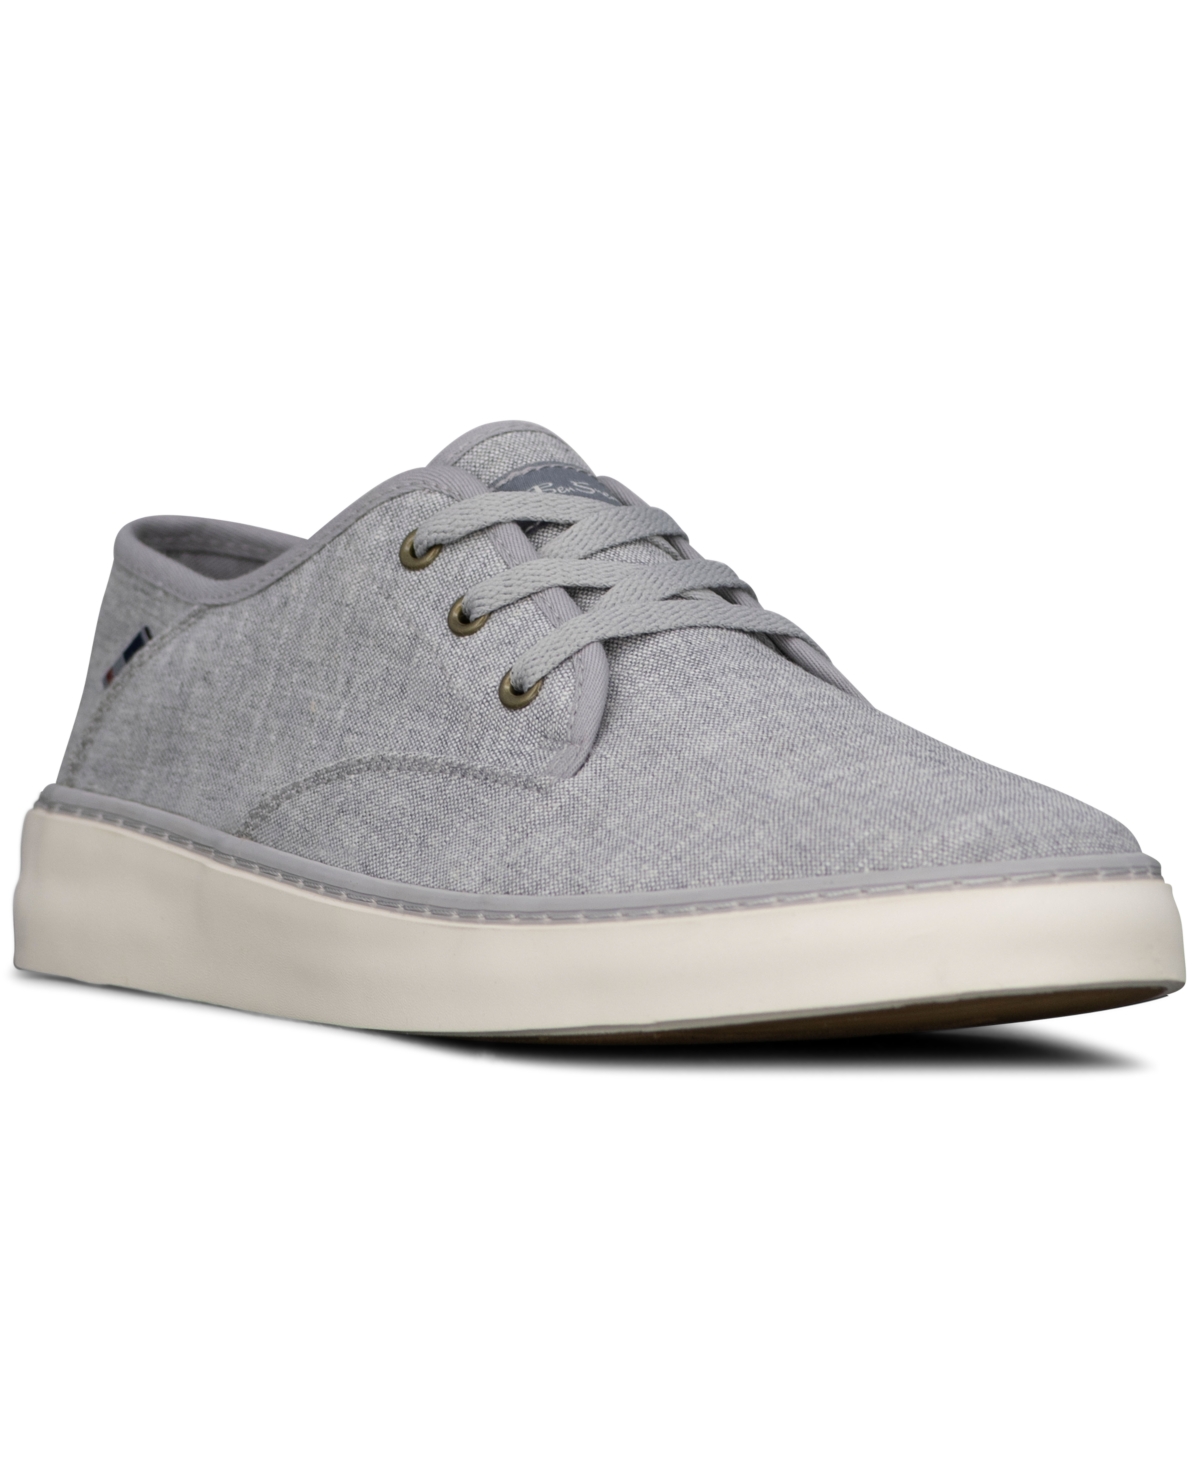 Men's Camden Low Casual Sneakers from Finish Line - Navy/White